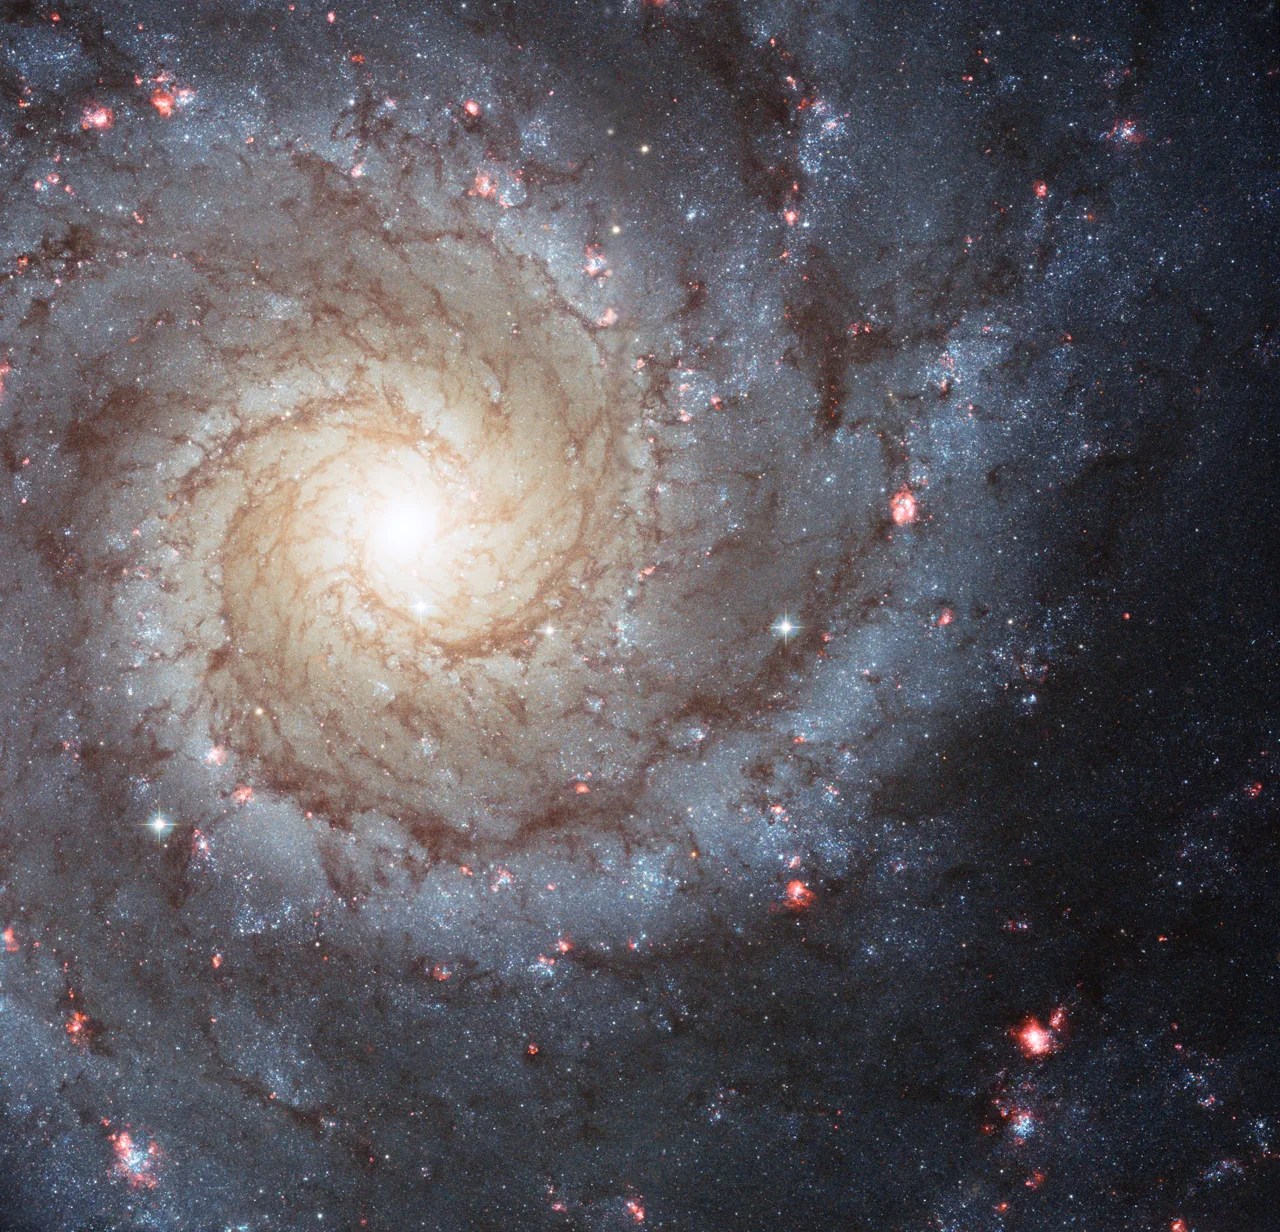 A large spiral galaxy fills the image. Its bright, yellow core is near the upper left, surrounded by big spiral arms laced through with dark dust and purple and pink regions of star formation.